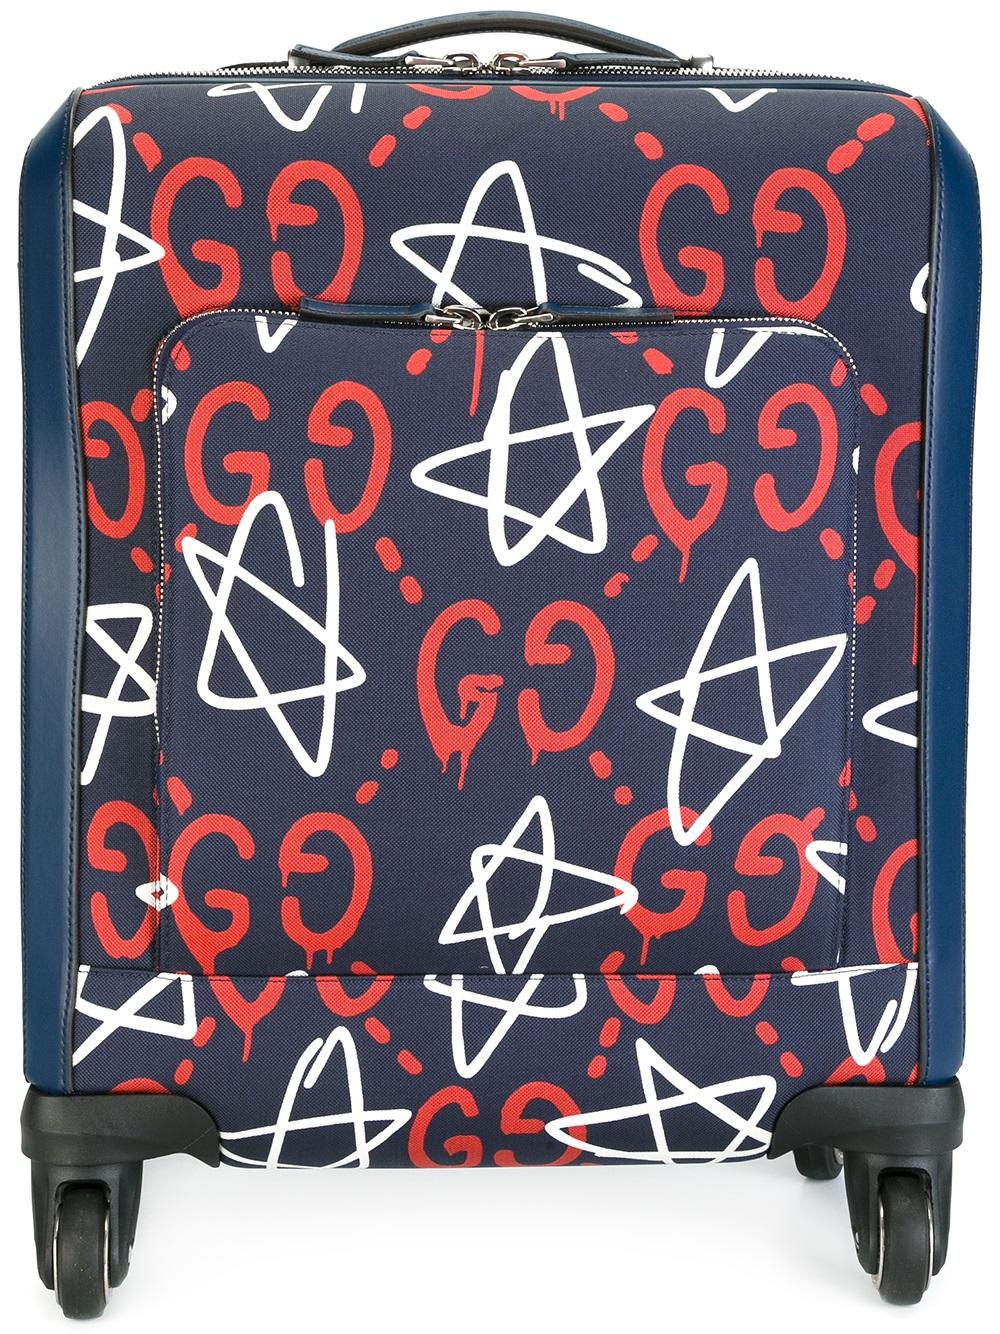 Gucci GucciGhost Carry-On Luggage